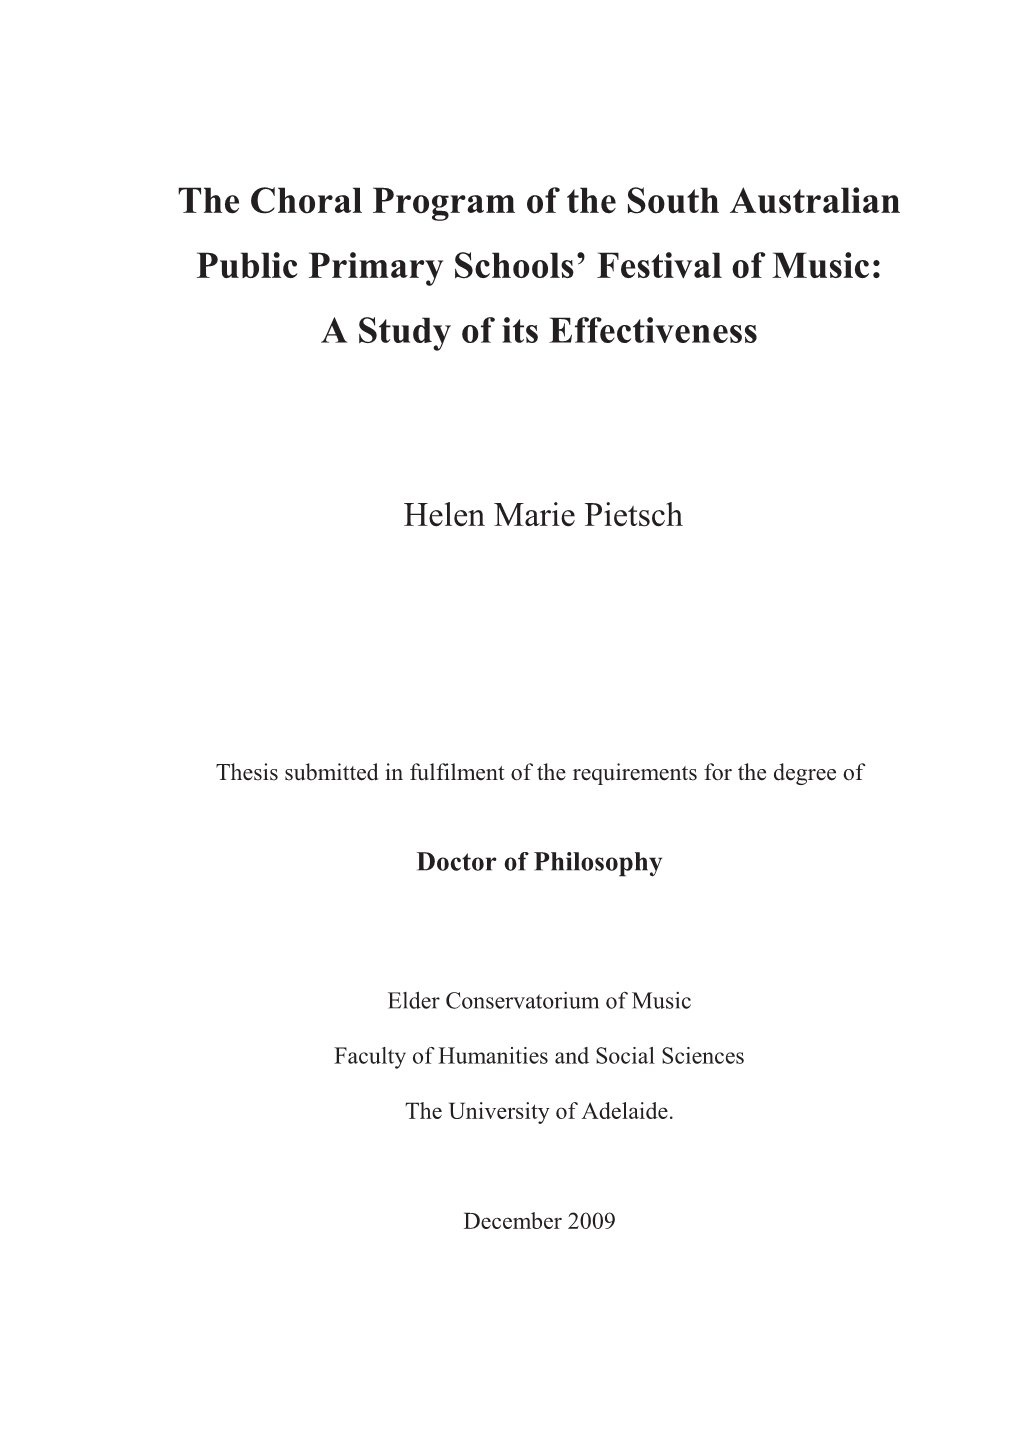 The Choral Program of the South Australian Public Primary Schools’ Festival of Music: a Study of Its Effectiveness